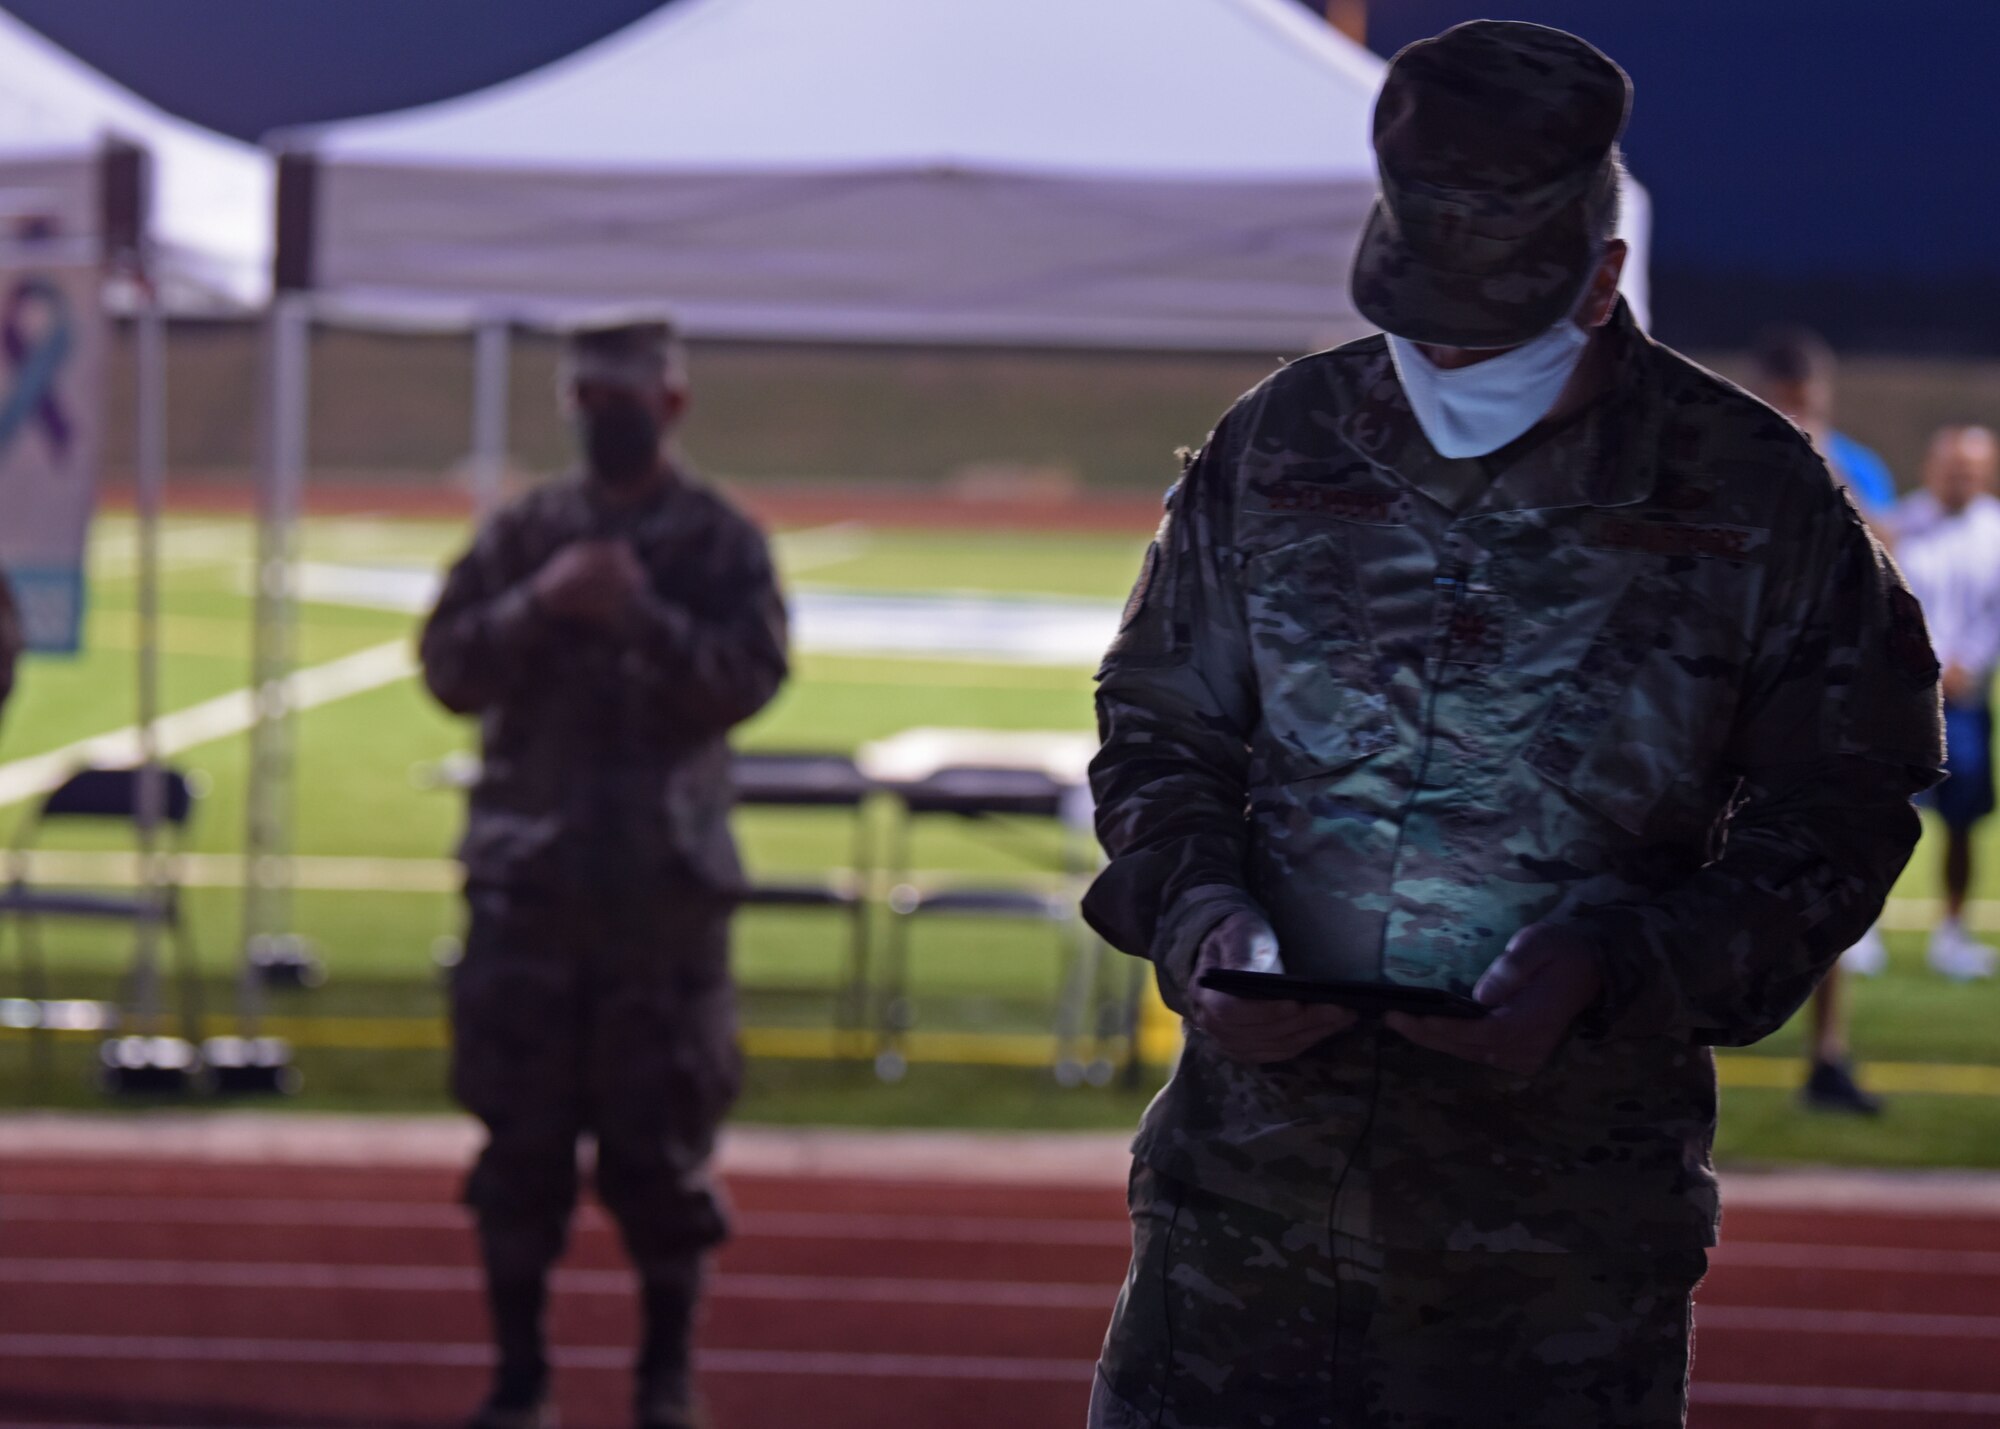 U.S. Air Force Maj. Jeremiah Blackburn, 17th Training Wing chaplain, addresses participants at the Suicide Awareness 24 Hour Walk/Run at the Mathis Field Track on Goodfellow Air Force Base, Texas, Sept. 18, 2020. Blackburn spoke on the importance of fellowship in the military. (U.S. Air Force photo by Airman 1st Class Ethan Sherwood)